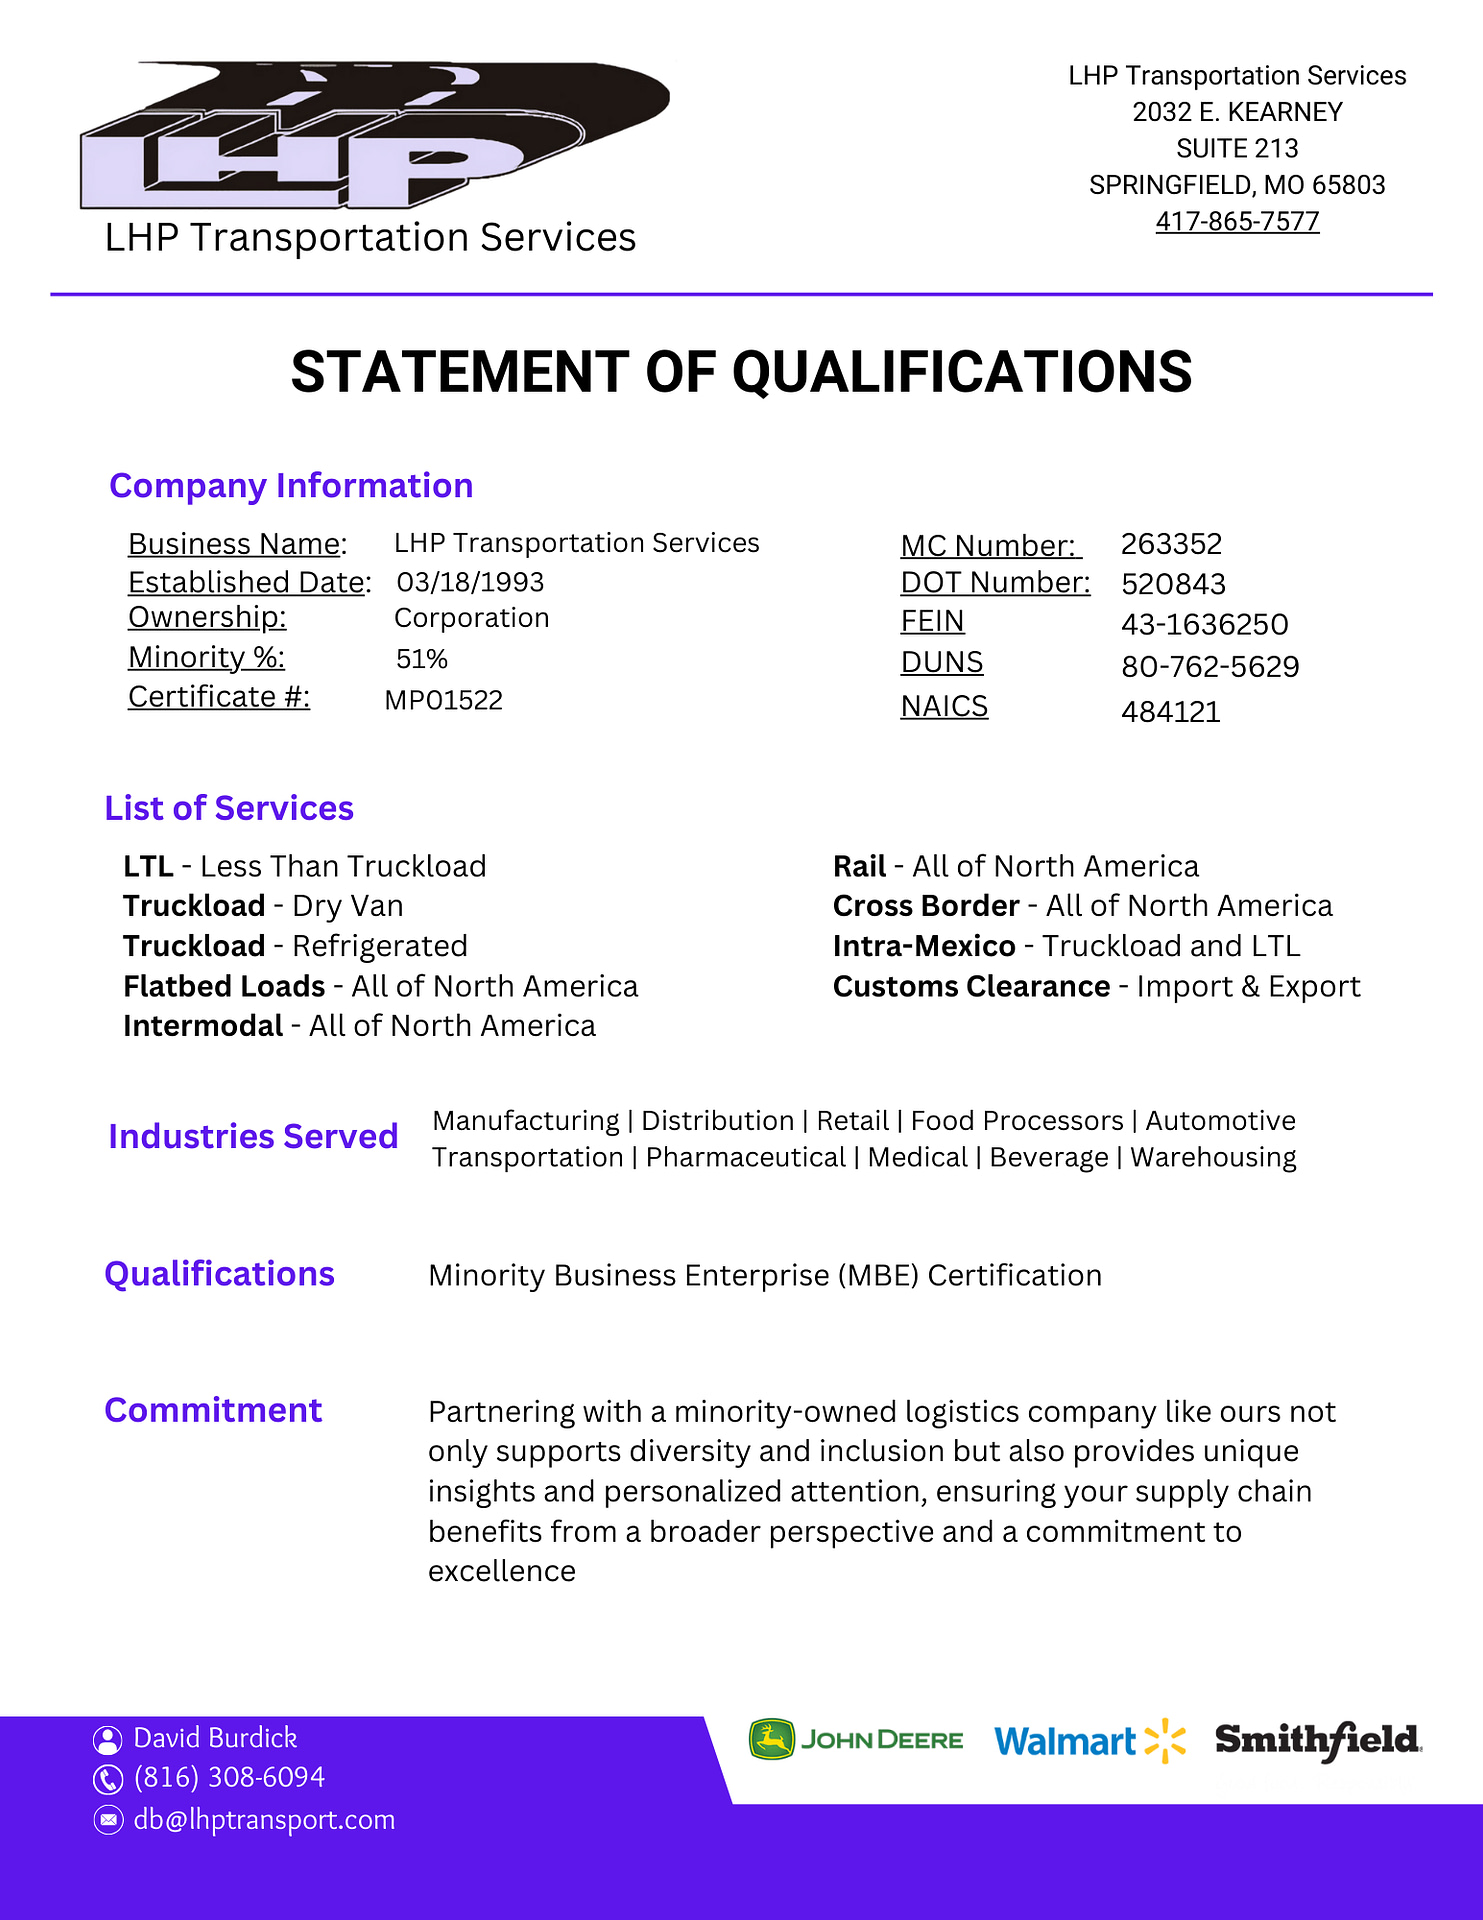 LHP Statement of Qualifications